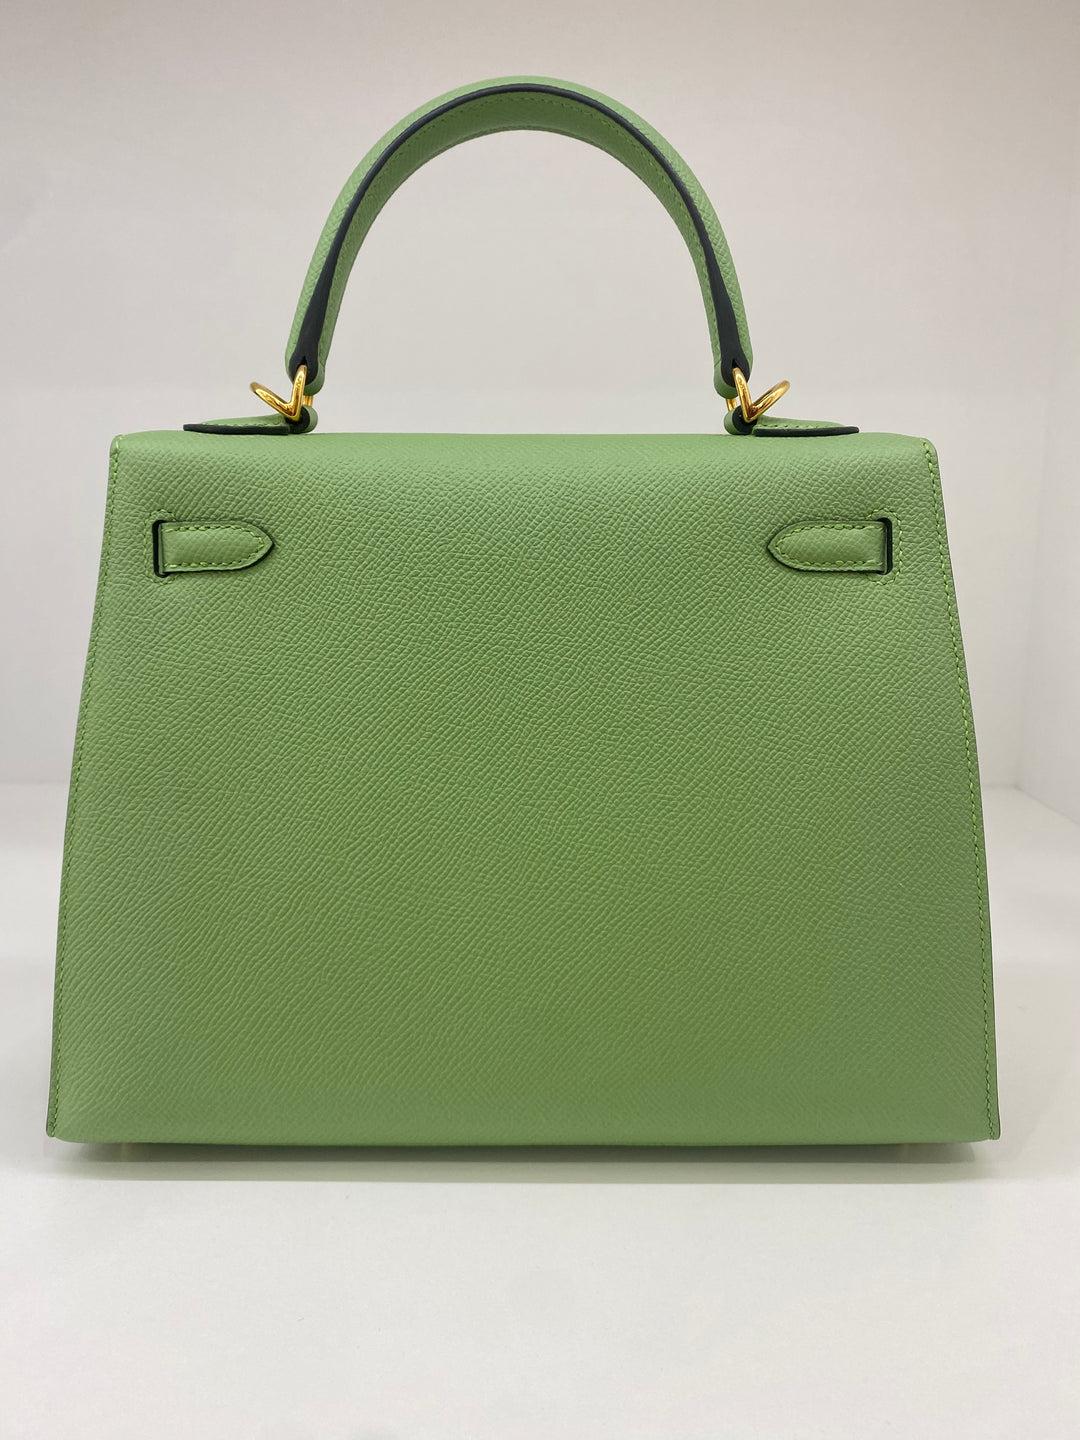 Hermes Kelly 25 Vert Criquet GHW  In Excellent Condition For Sale In Double Bay, AU